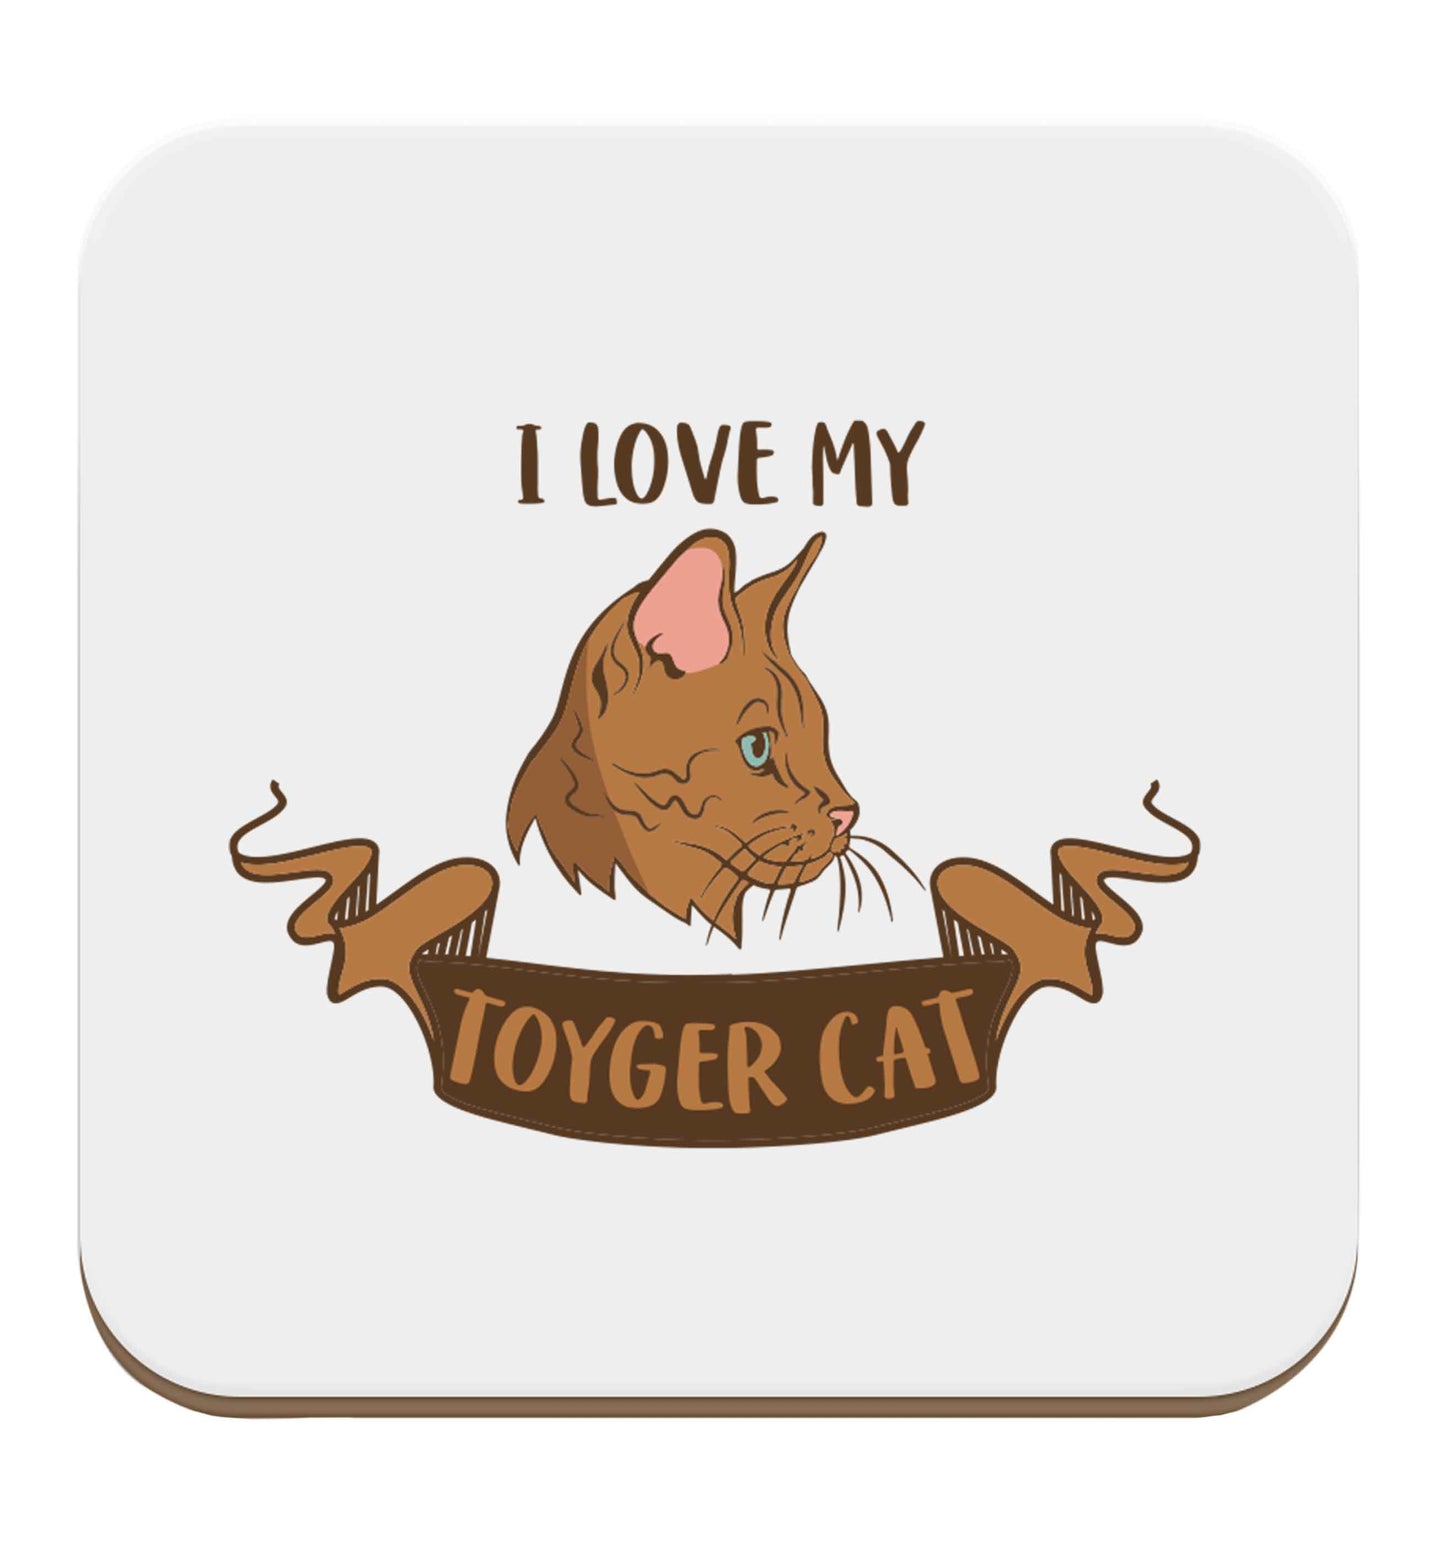 I love my toyger cat set of four coasters